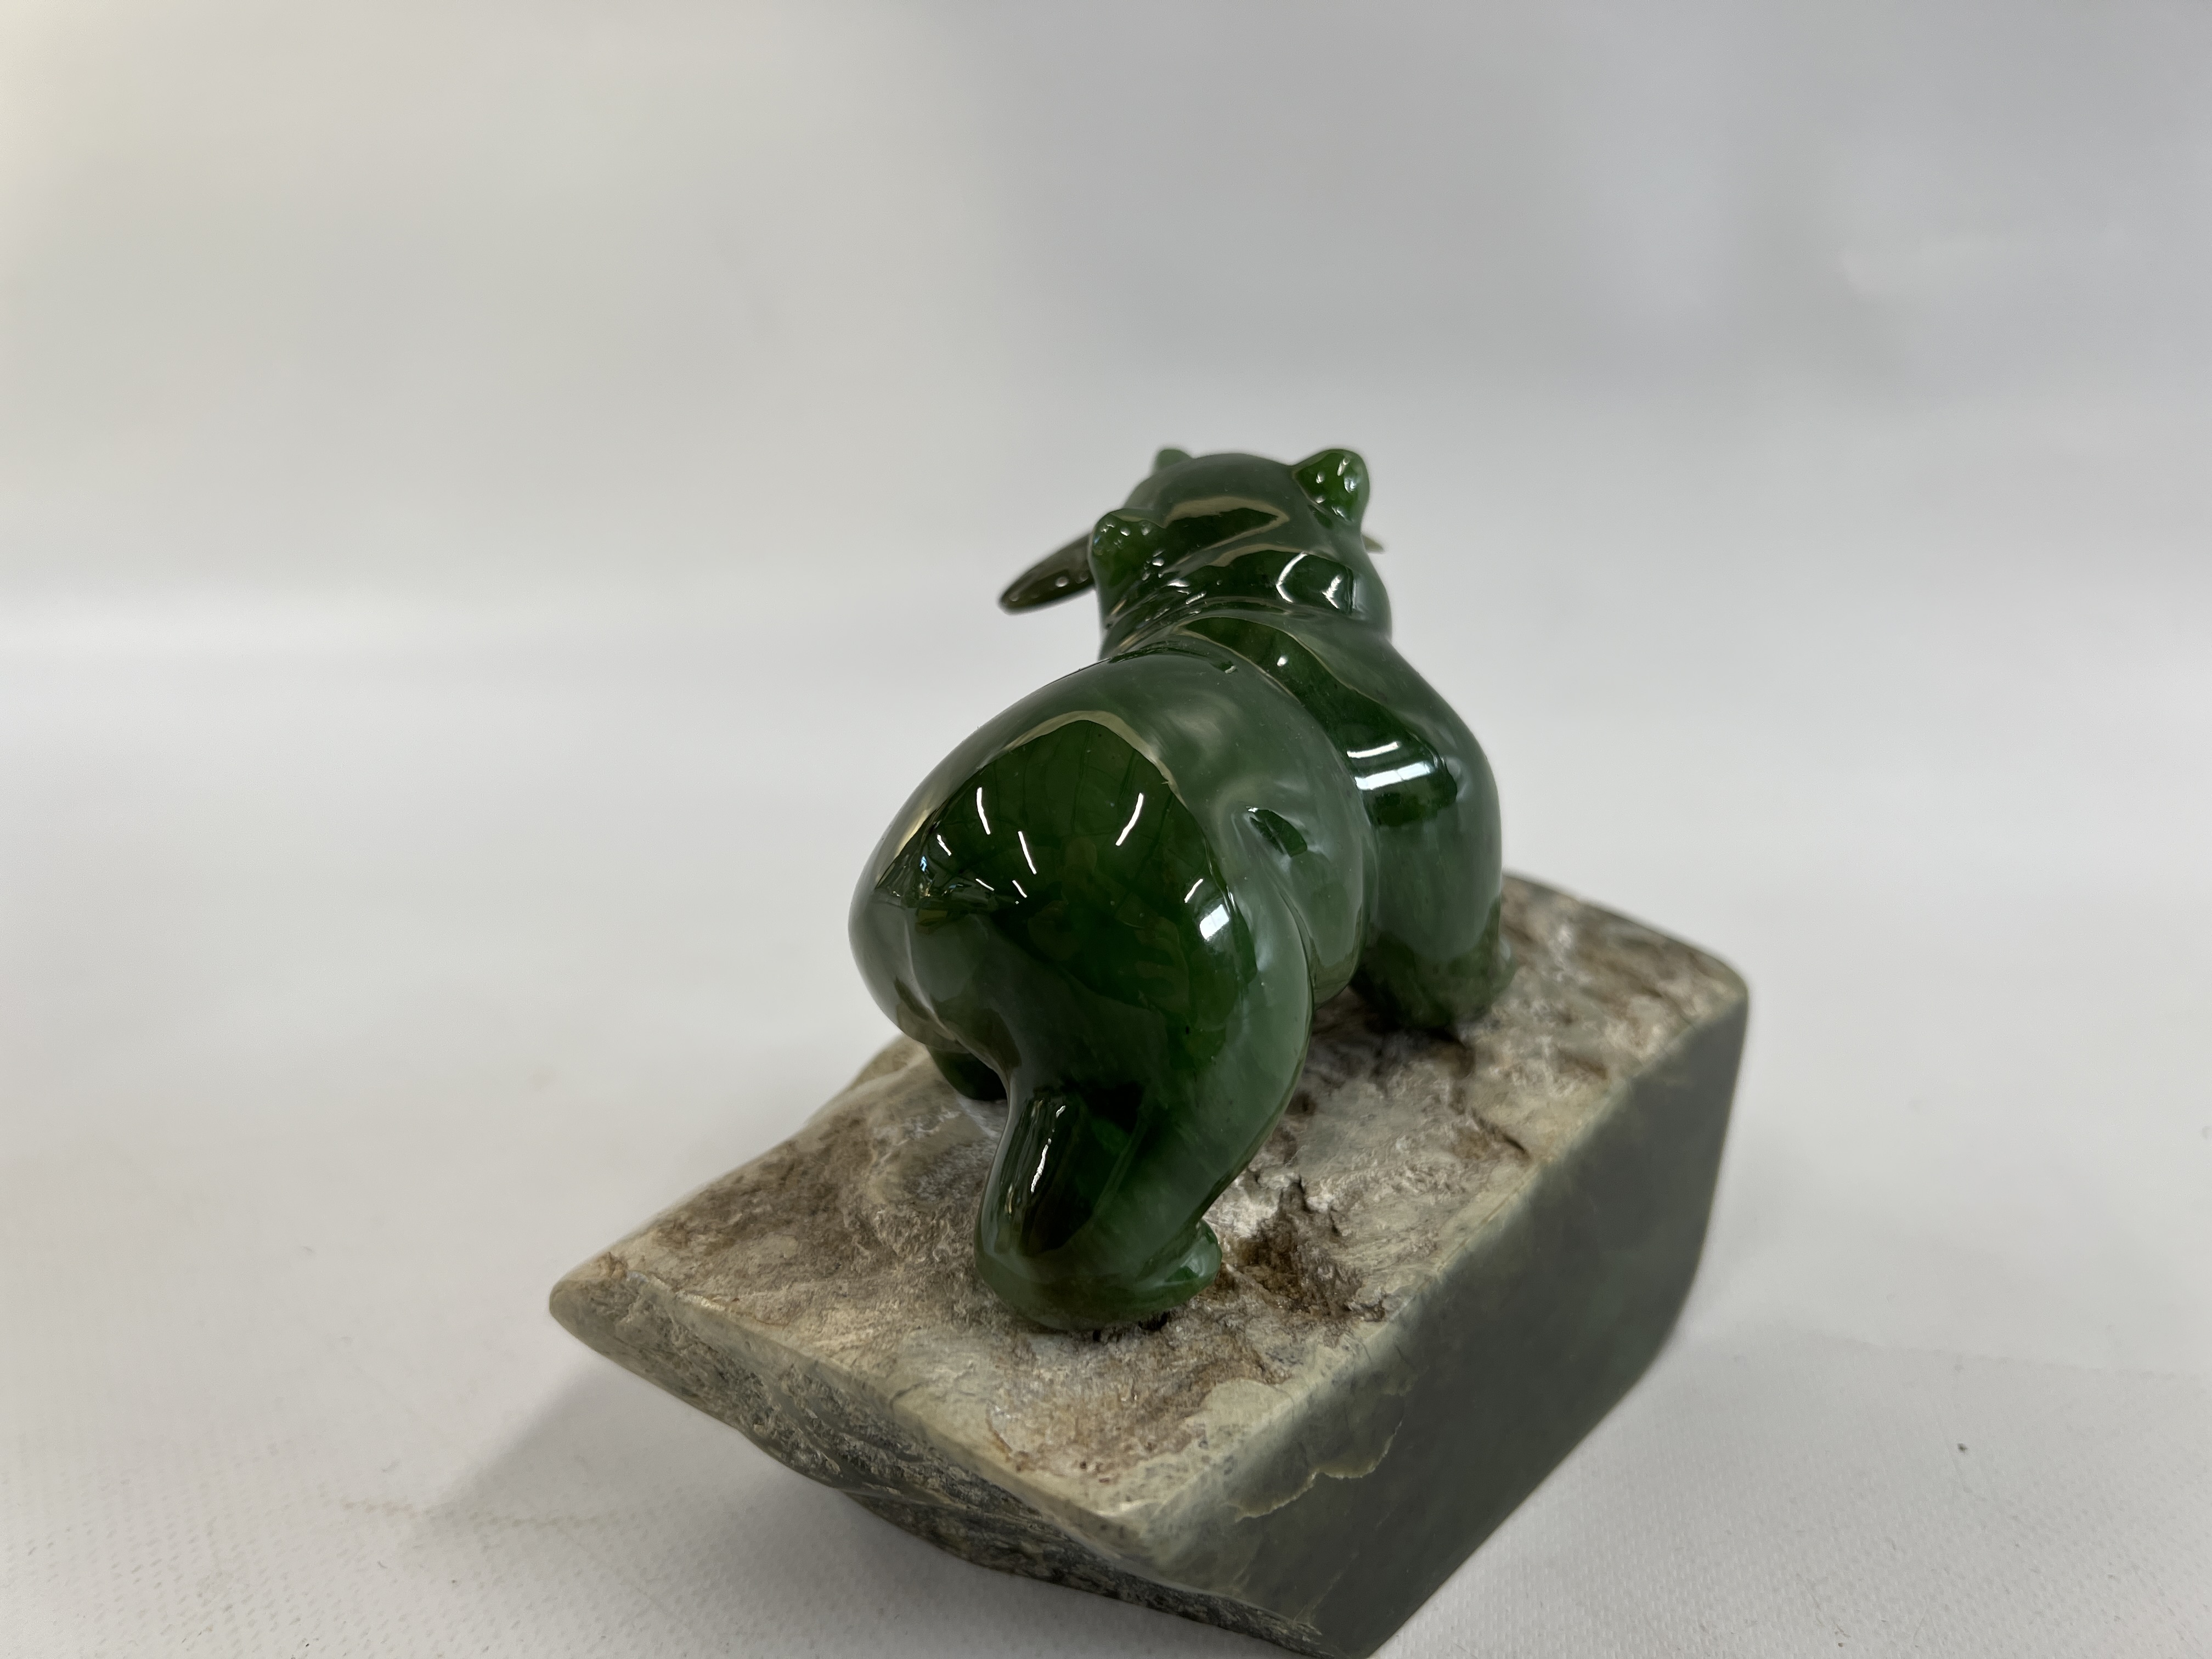 A B.C. JADE CARVING SIGNED BY CANADIAN ARTIST "TONY WU" FEATURES A BEAR - Image 5 of 9